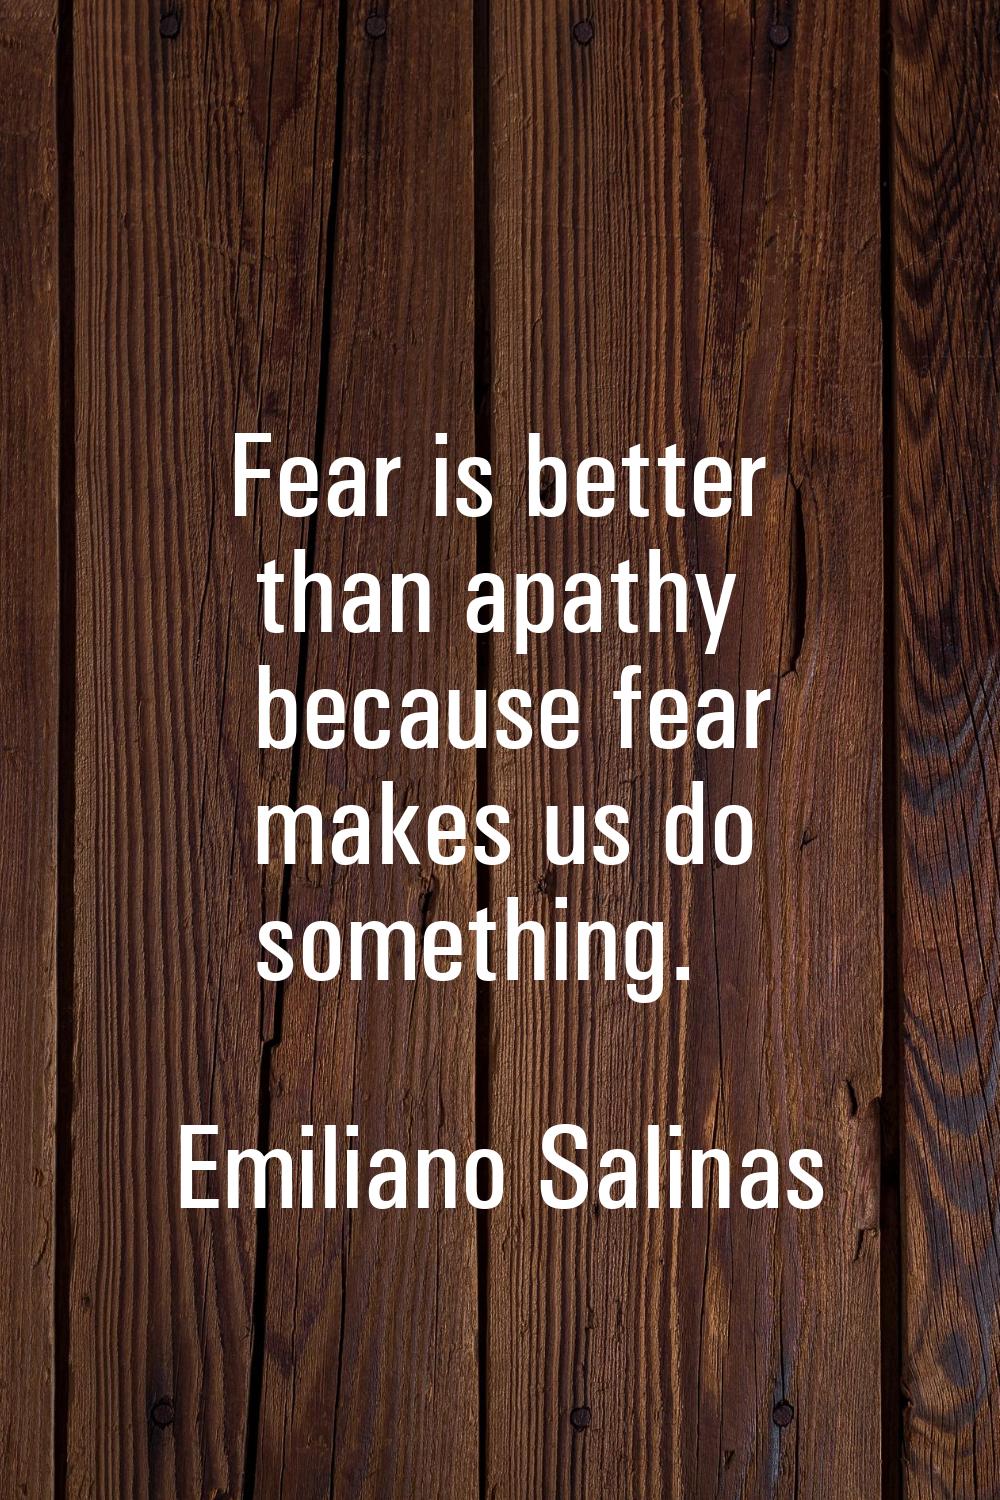 Fear is better than apathy because fear makes us do something.